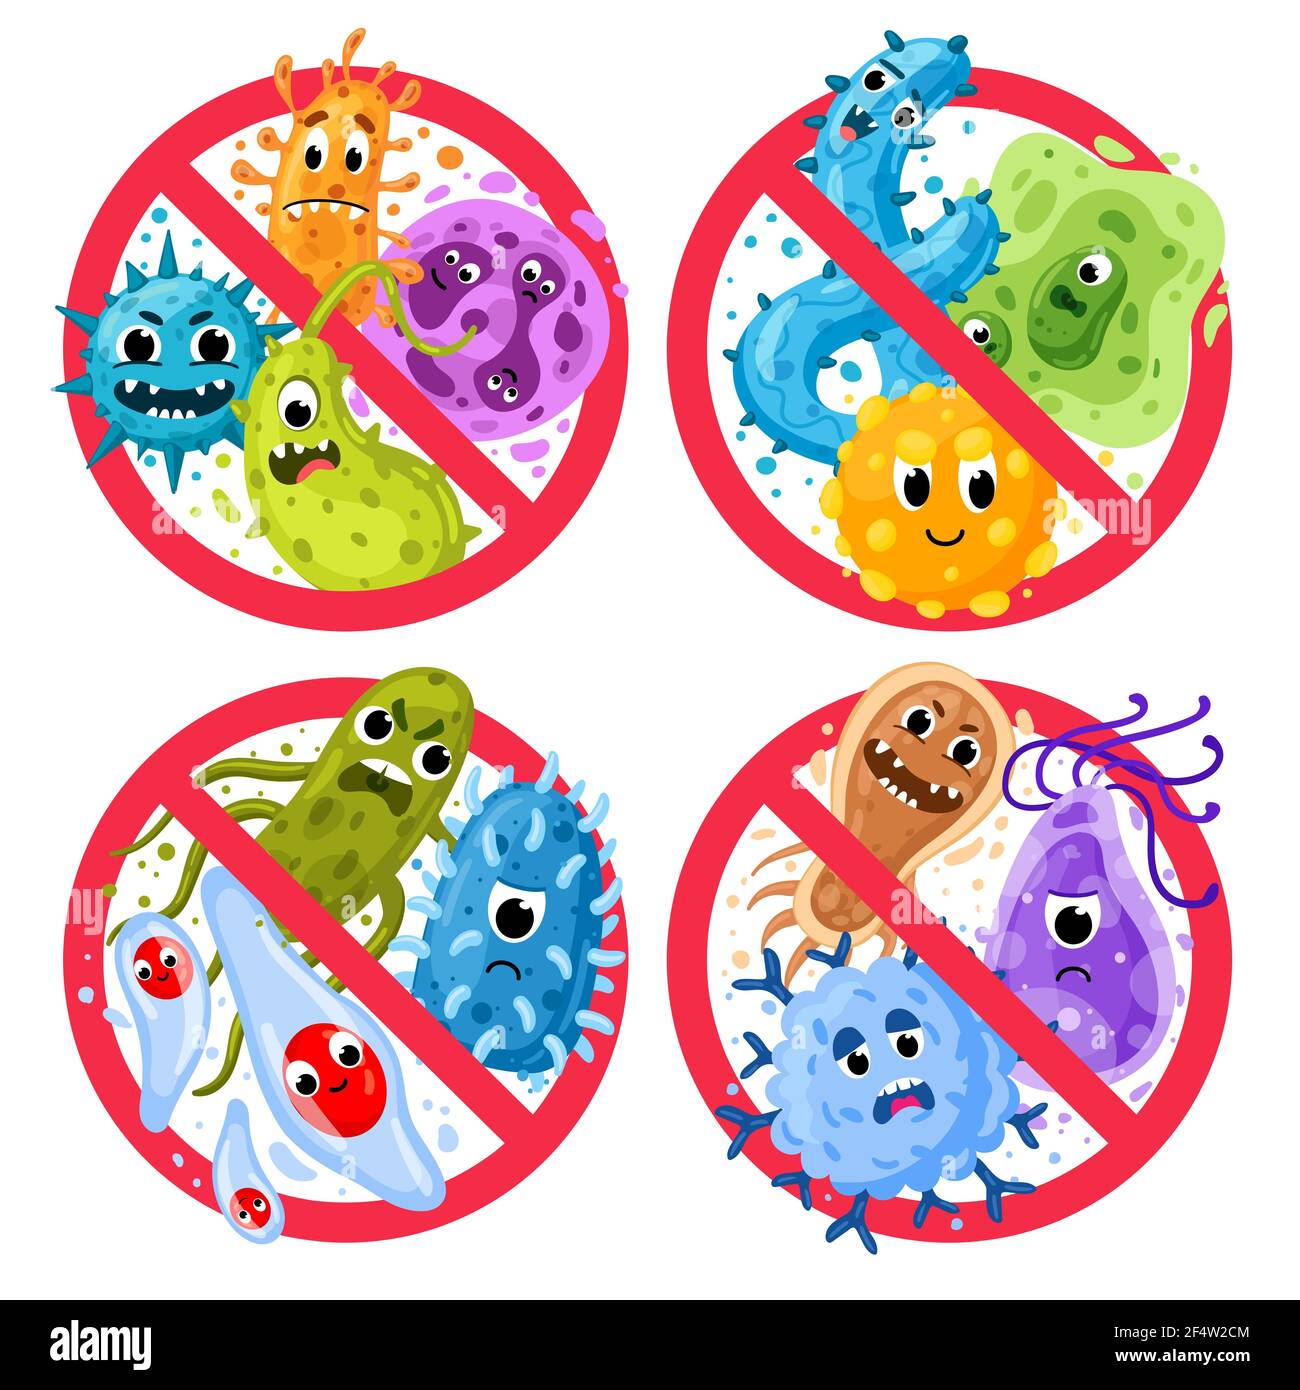 Bacterial protection. Germs in ged round prohibition signs, disinfection and epidemic prevention icons. Stop infection vector illustration set Stock Vector